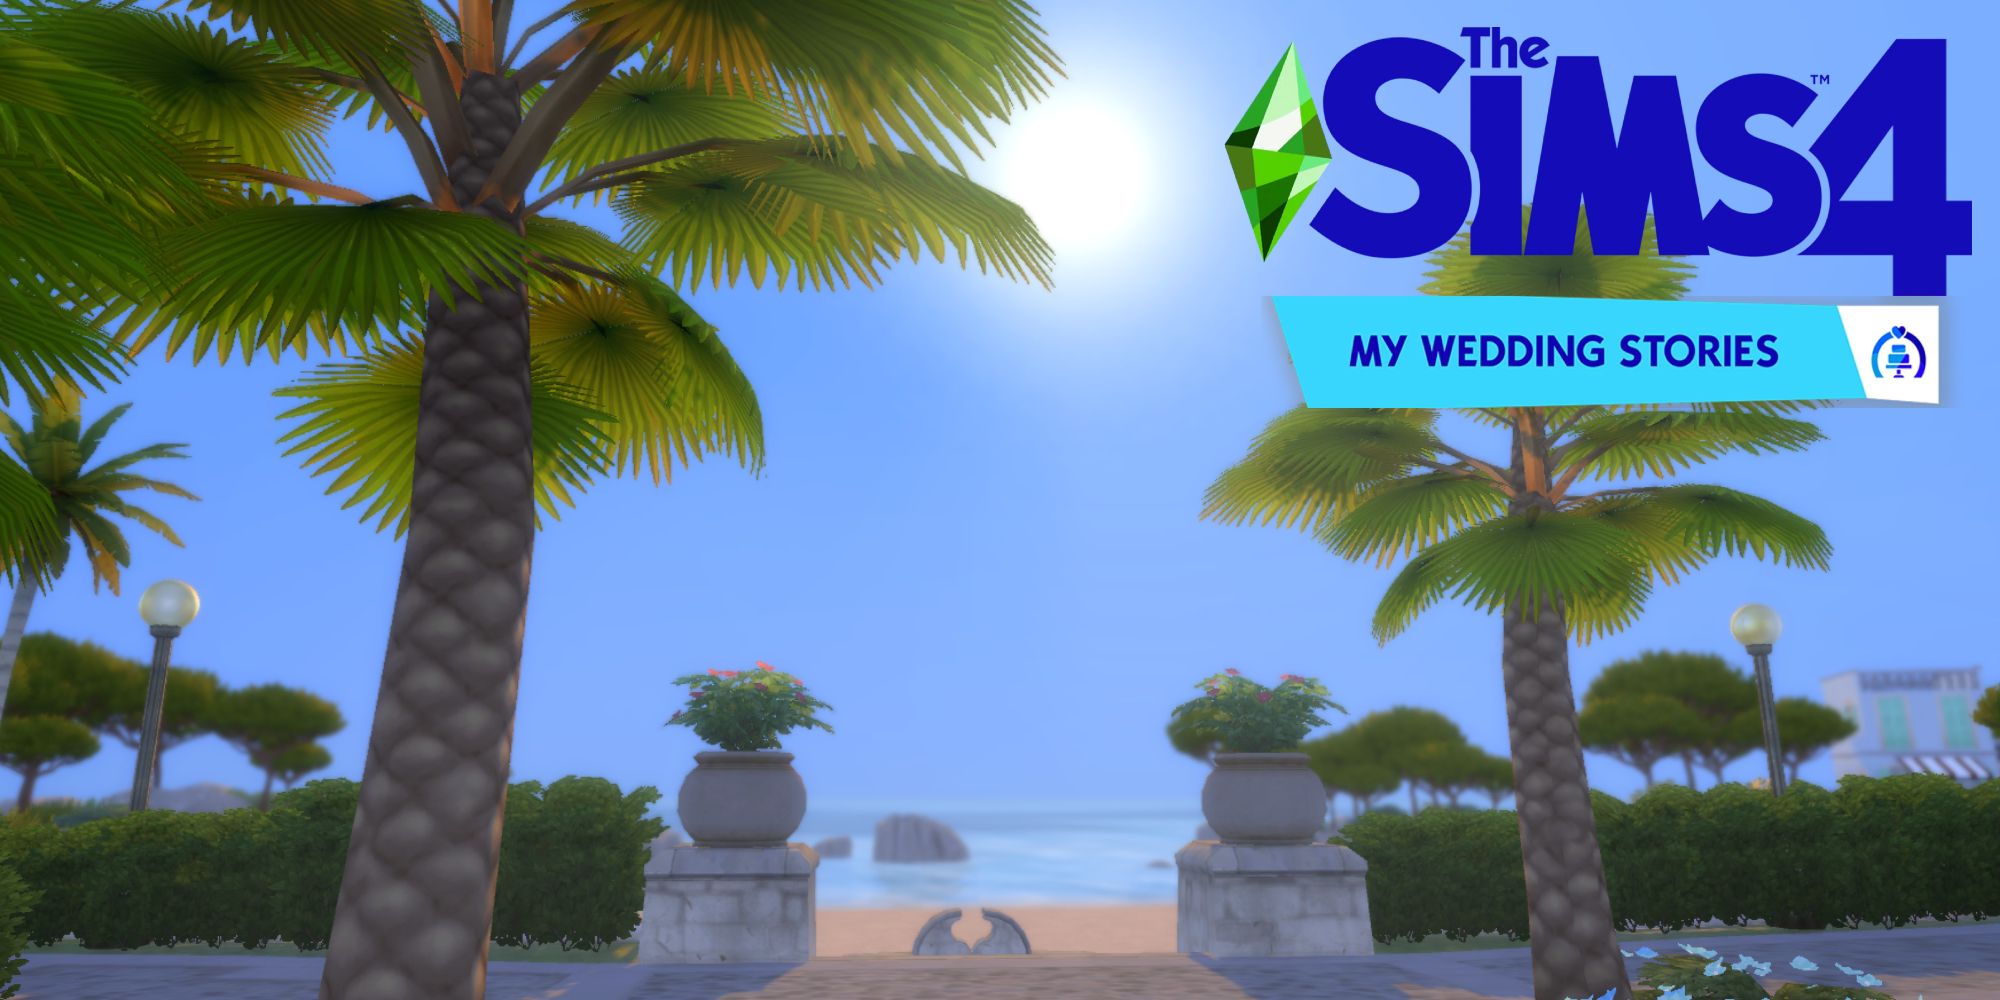 Tartosa is a hot world in The Sims 4 from the My Wedding Stories game pack.